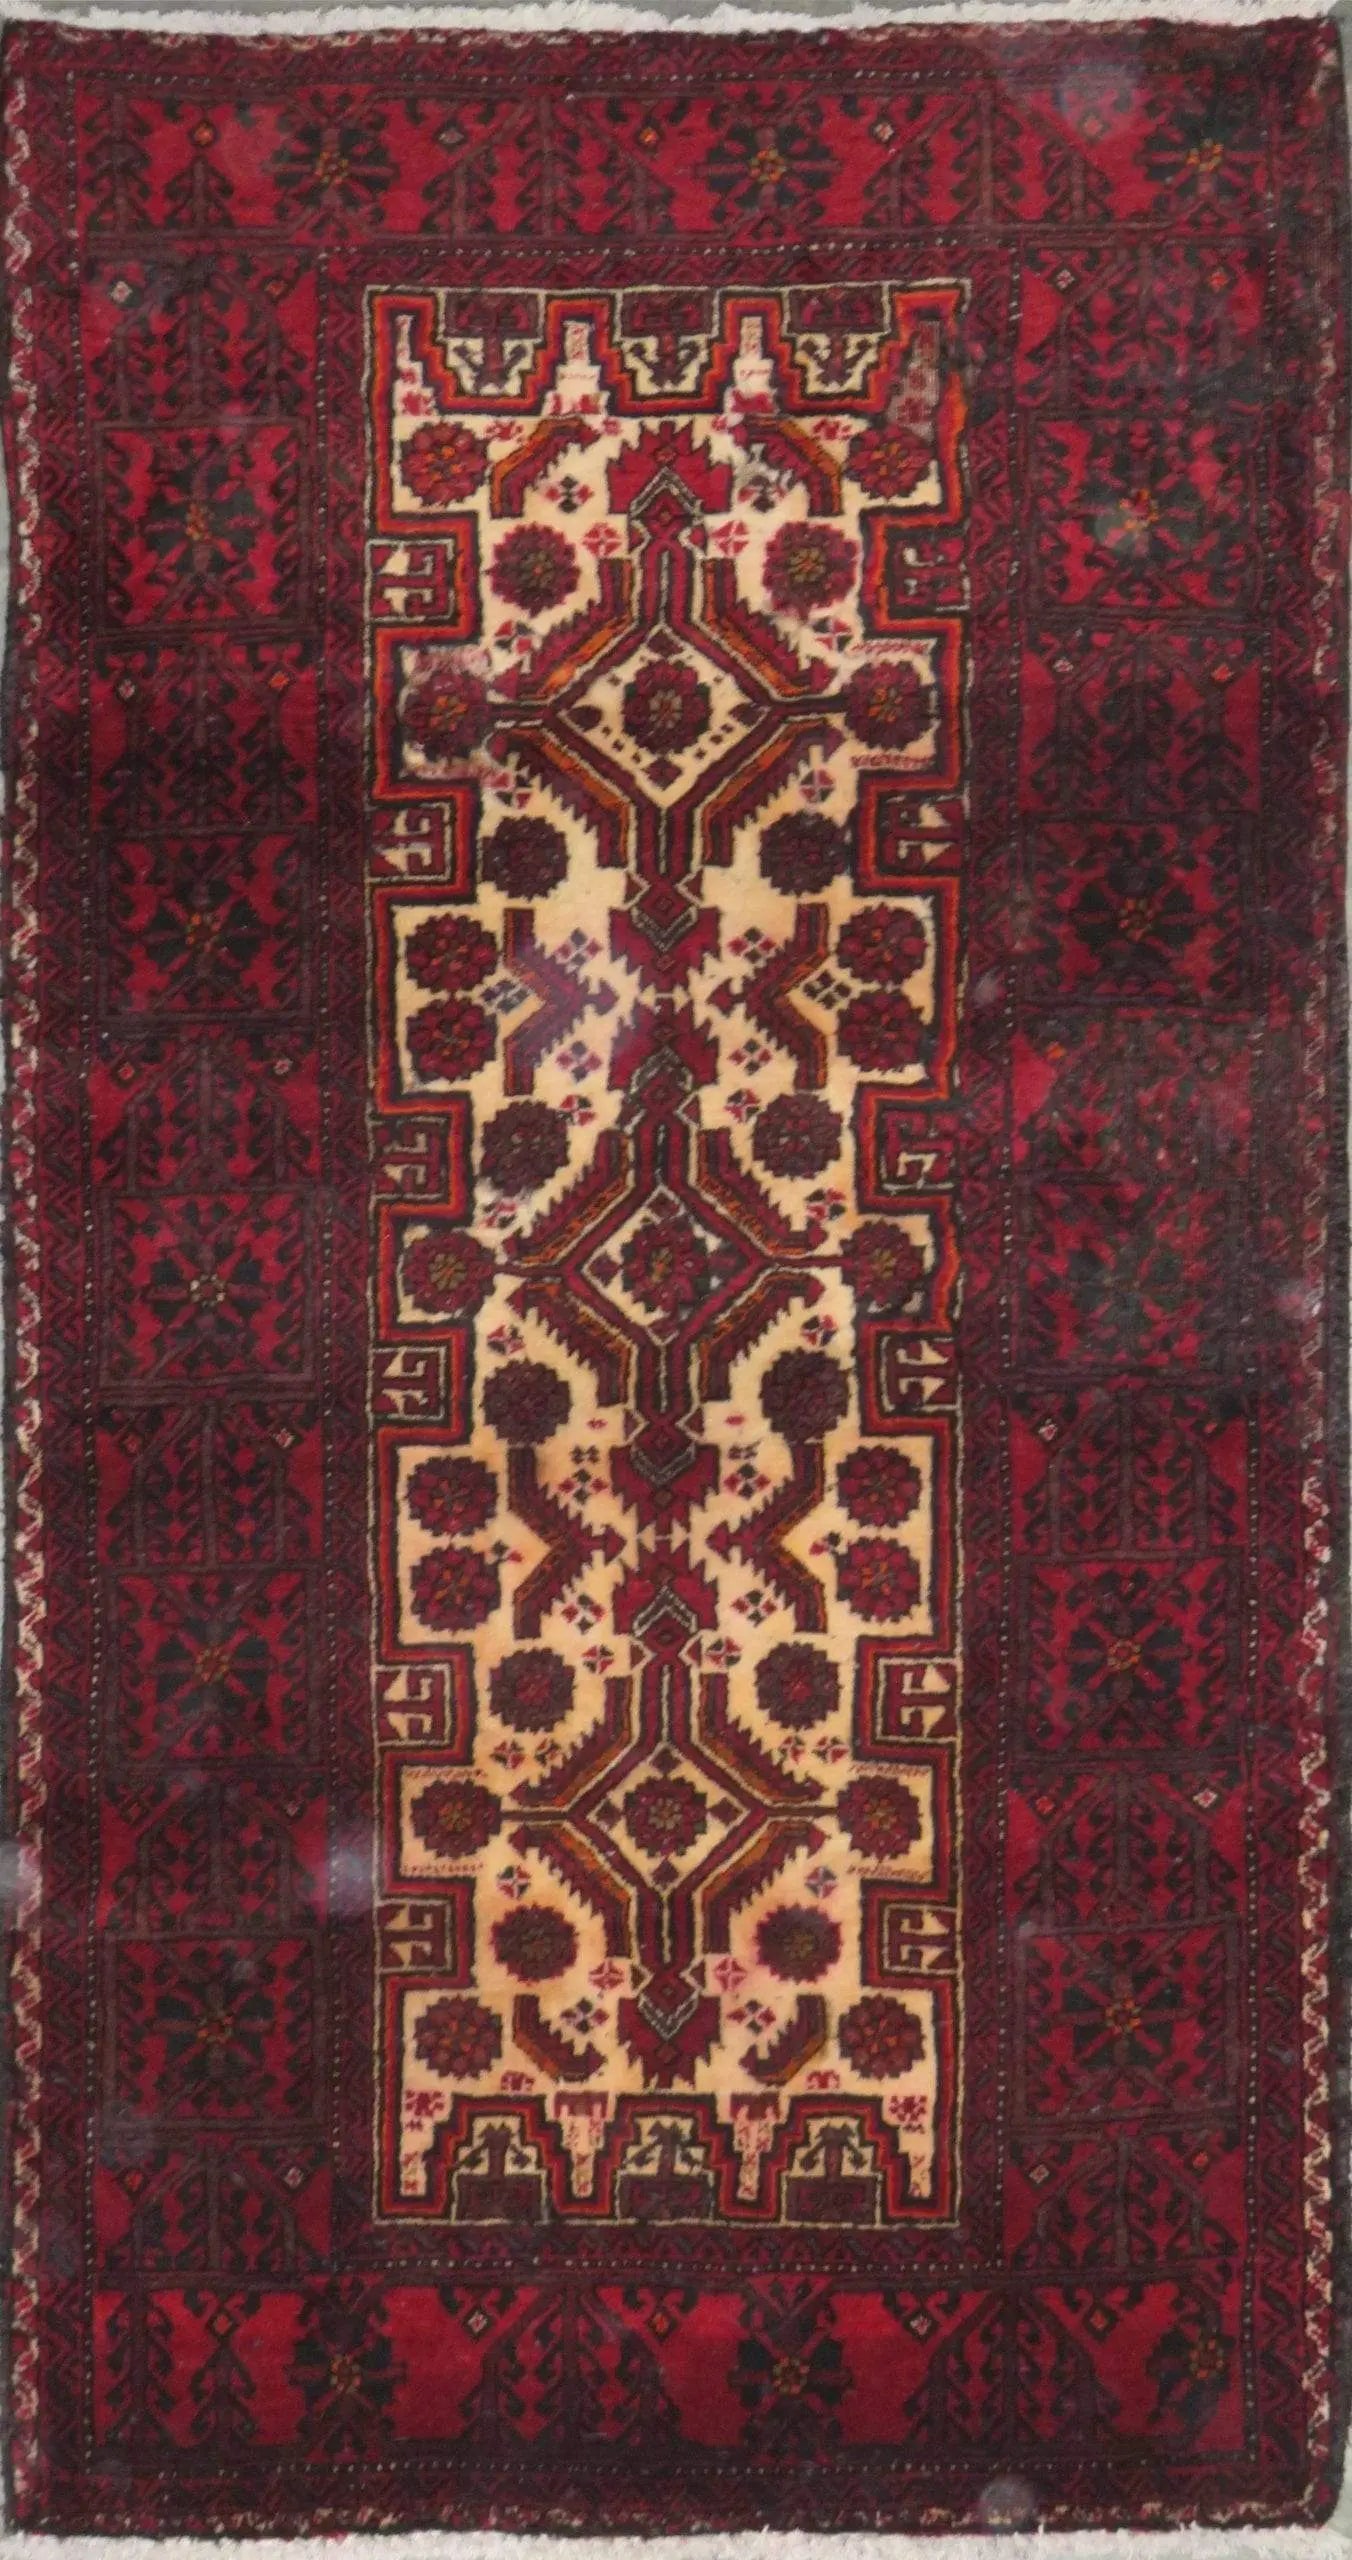 Hand-Knotted Persian Wool Rug _ Luxurious Vintage Design, 5'8" x 3'1", Artisan Crafted